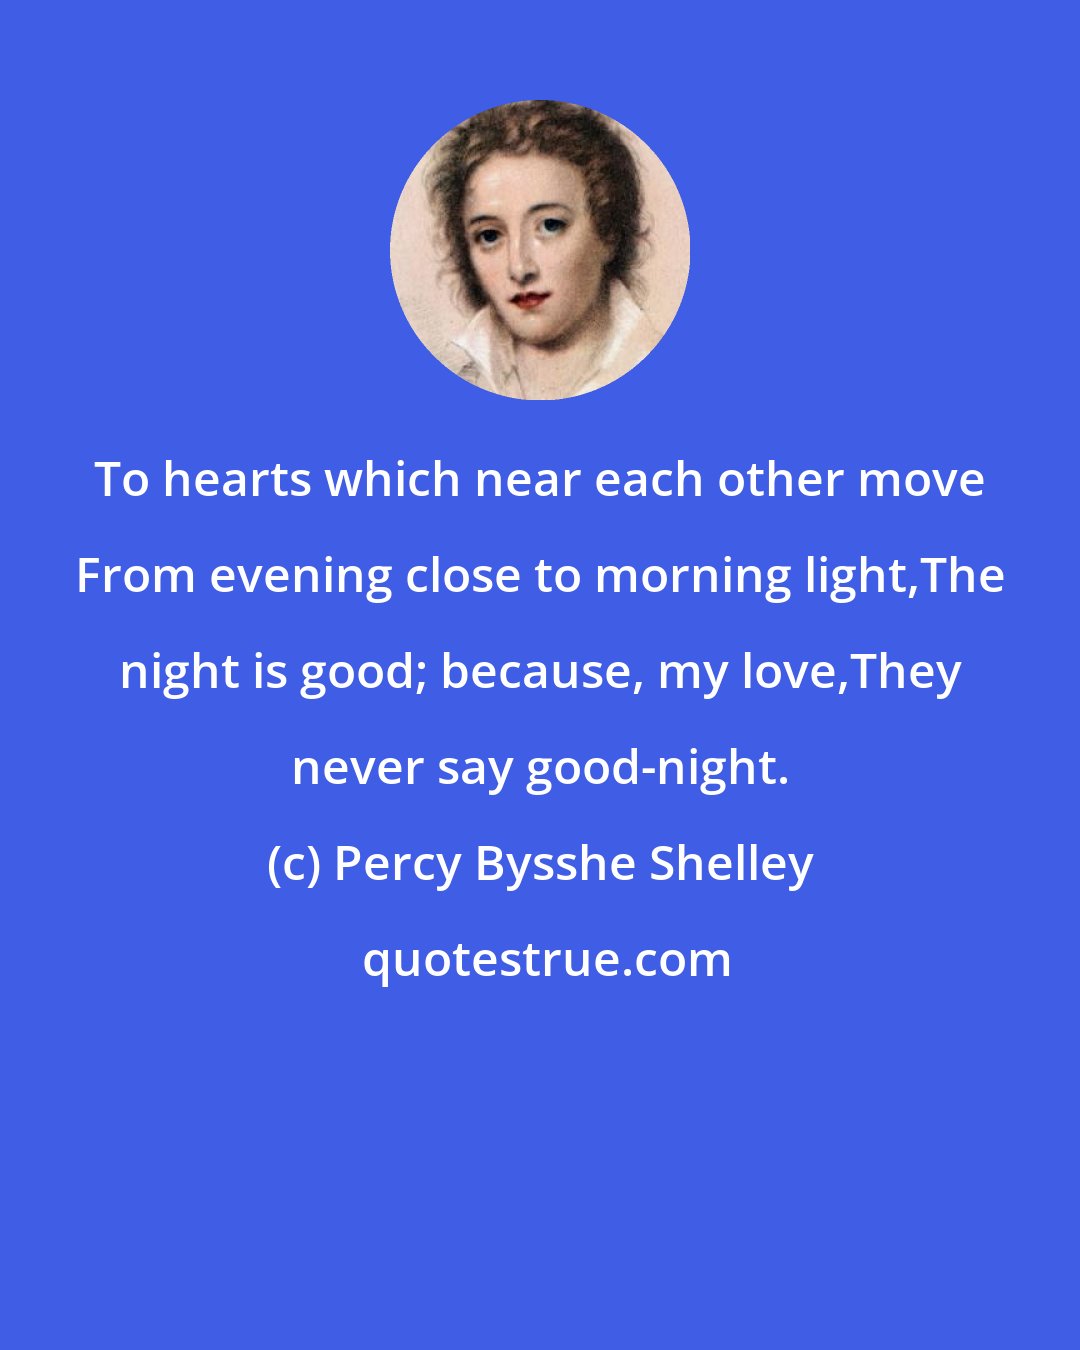 Percy Bysshe Shelley: To hearts which near each other move From evening close to morning light,The night is good; because, my love,They never say good-night.